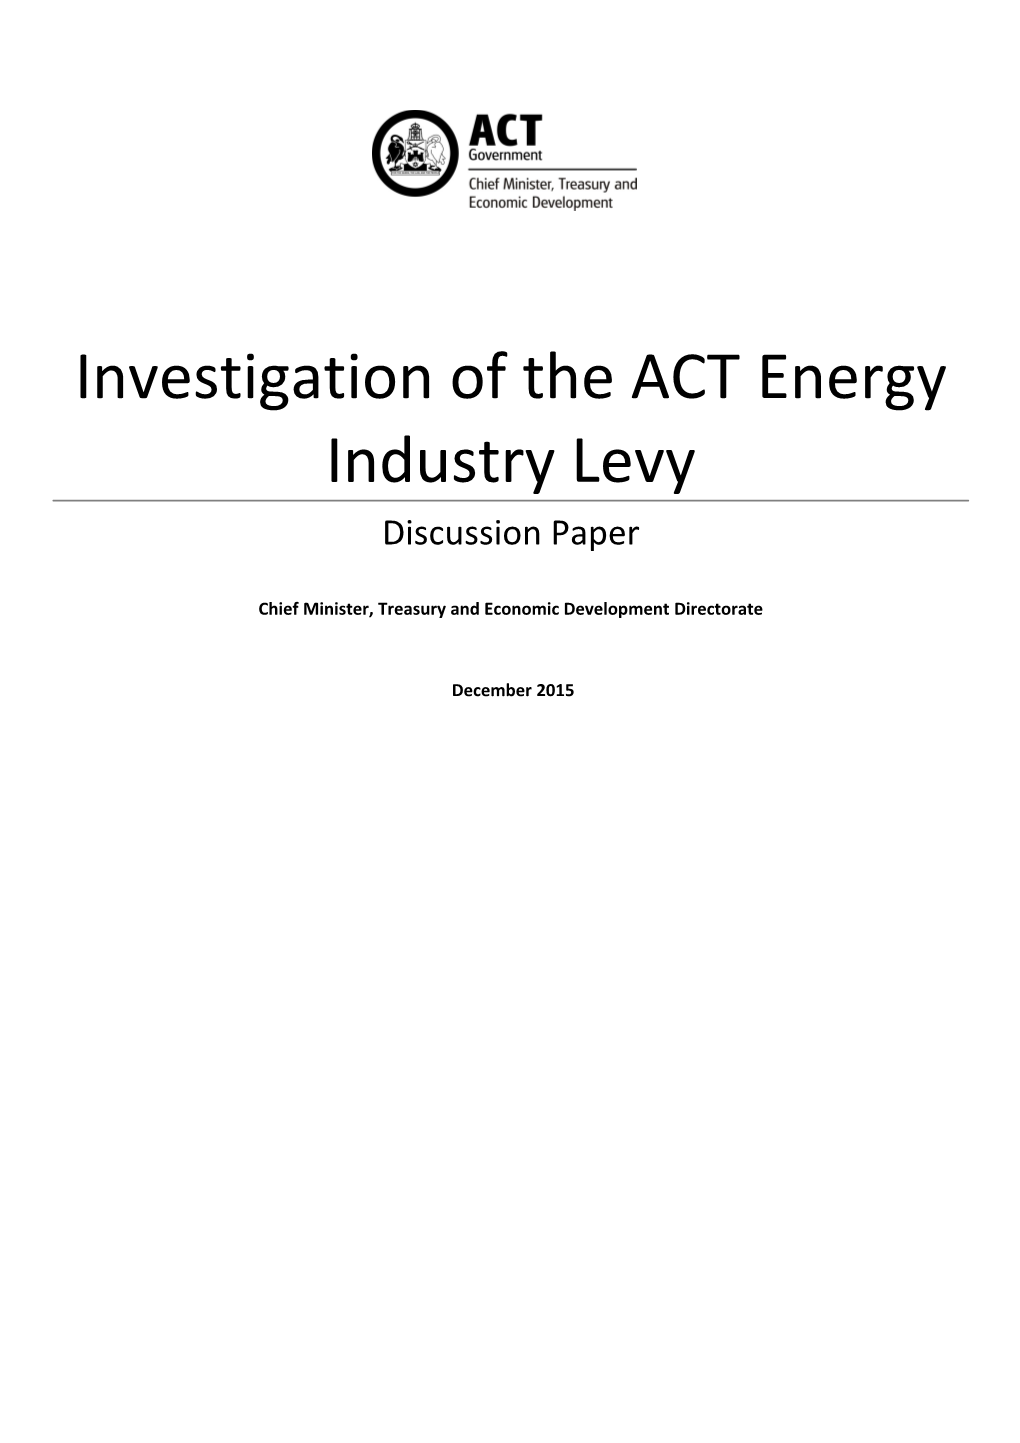 Investigation of ACT Energy Industry Levy